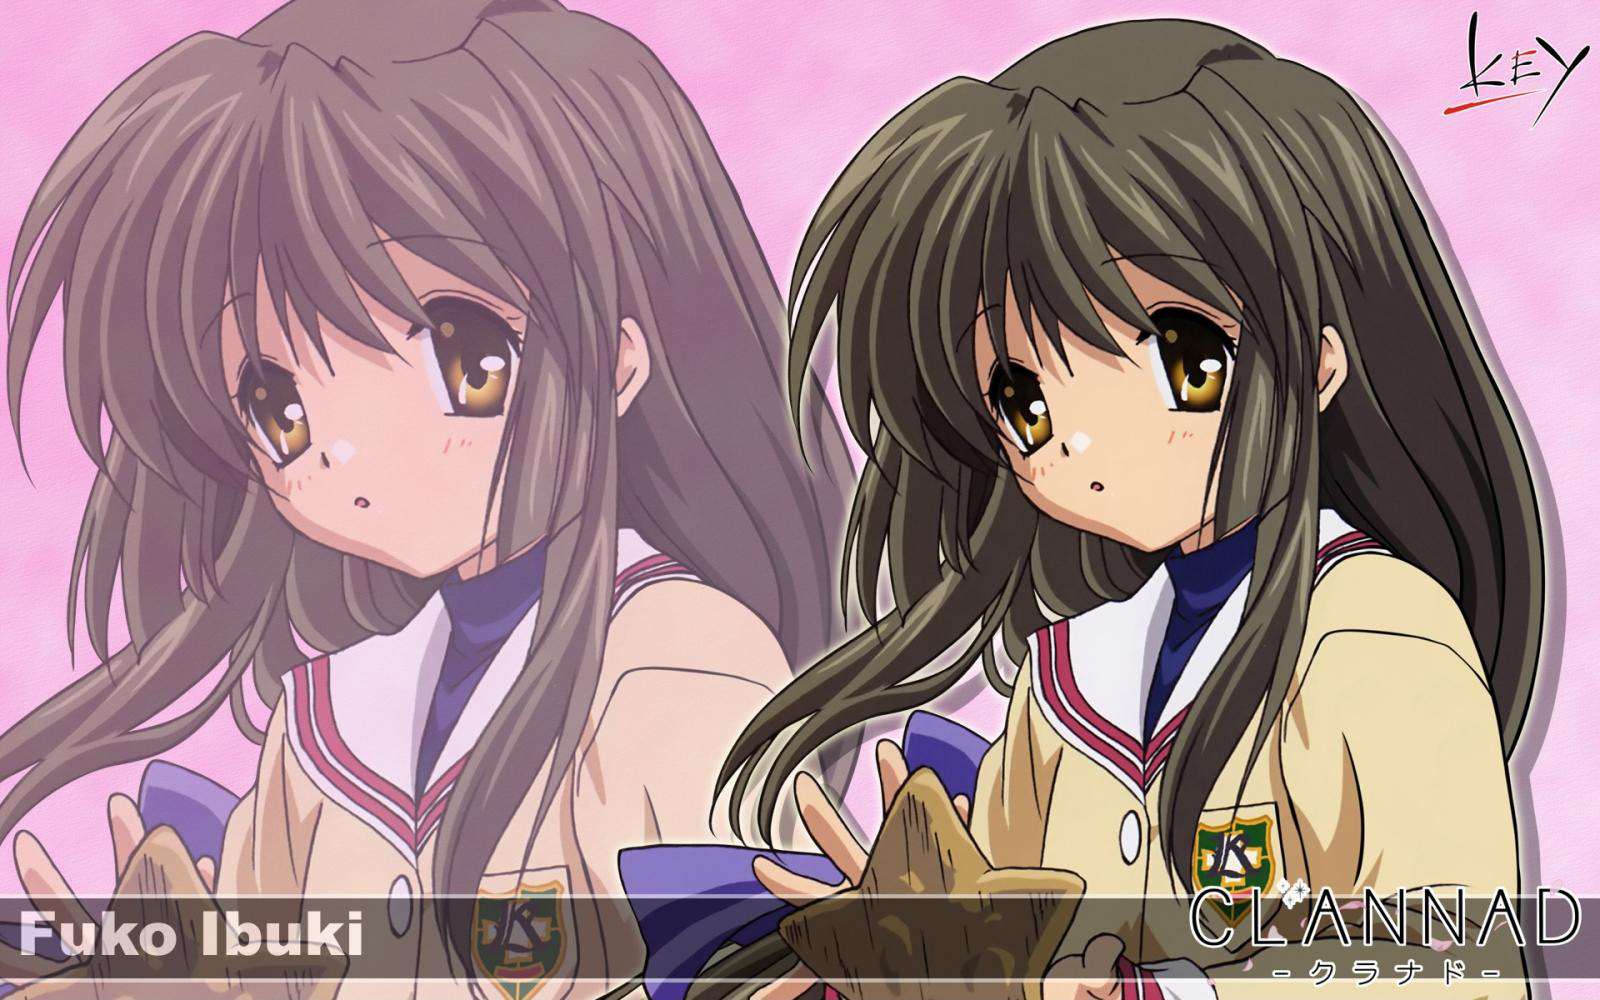 Clannad HD Wallpapers  Clannad, Anime, Clannad after story